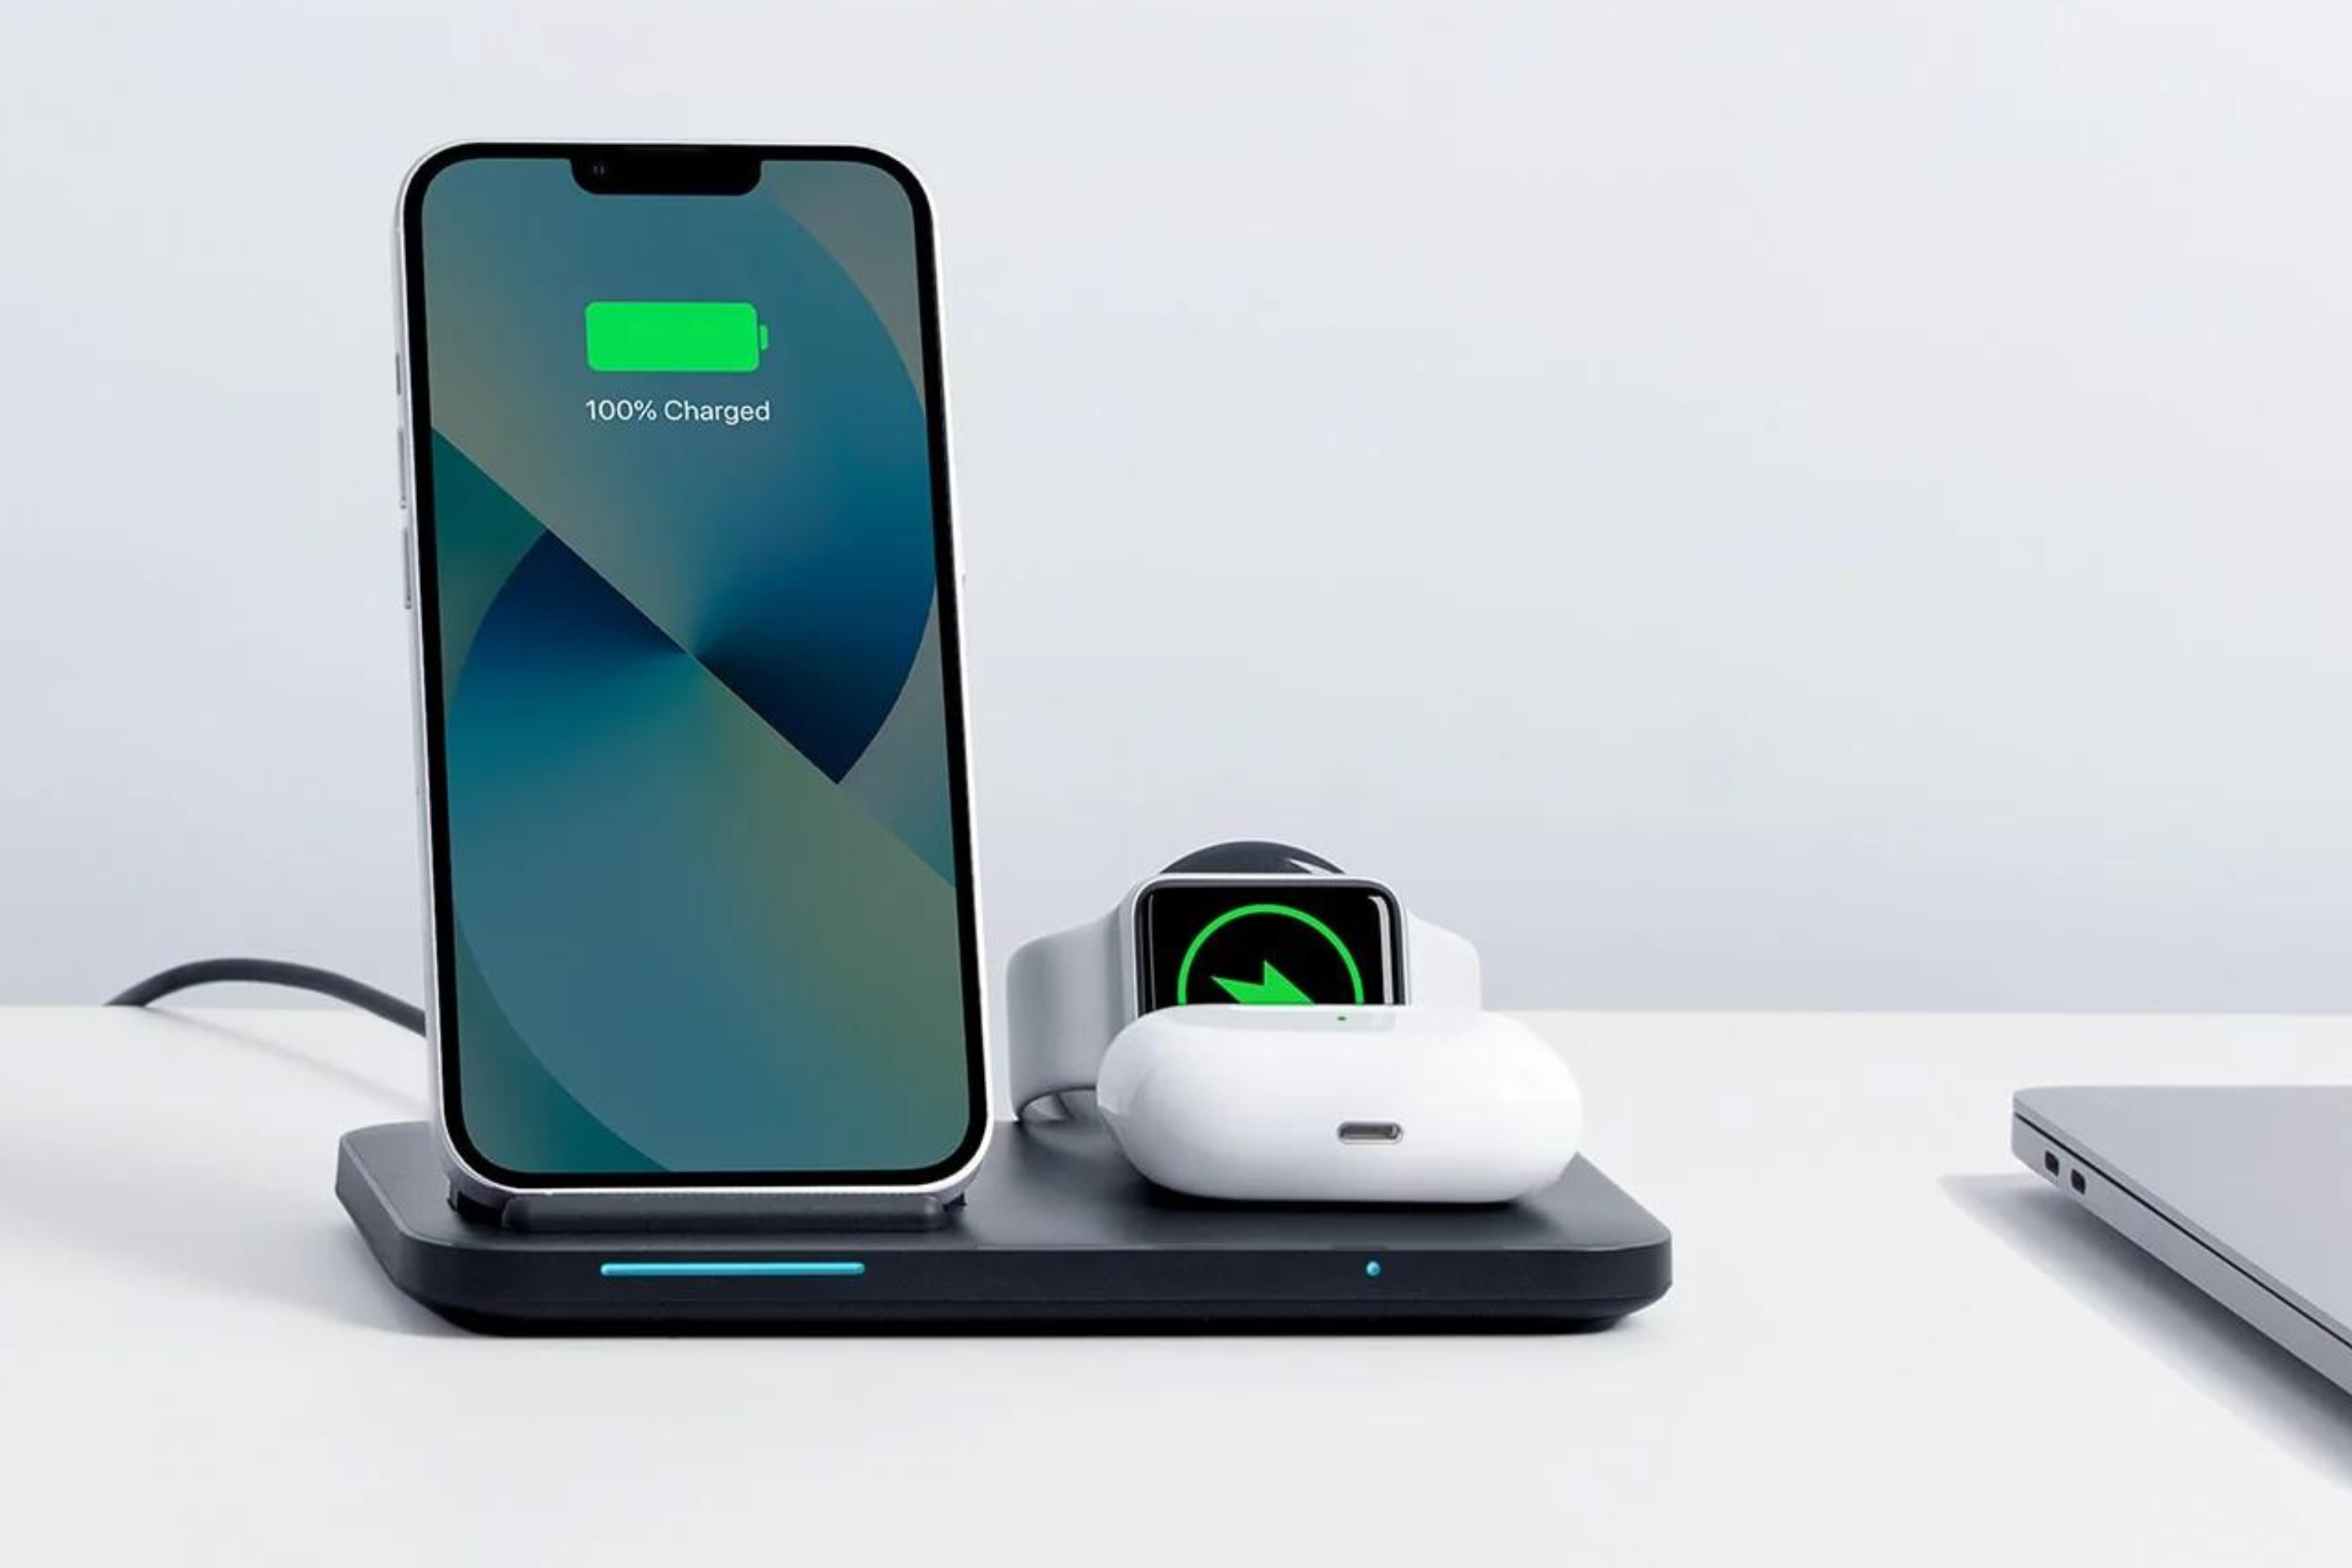 Anker 335 Wireless Charger plummets to lowest price ever in limited-time deal